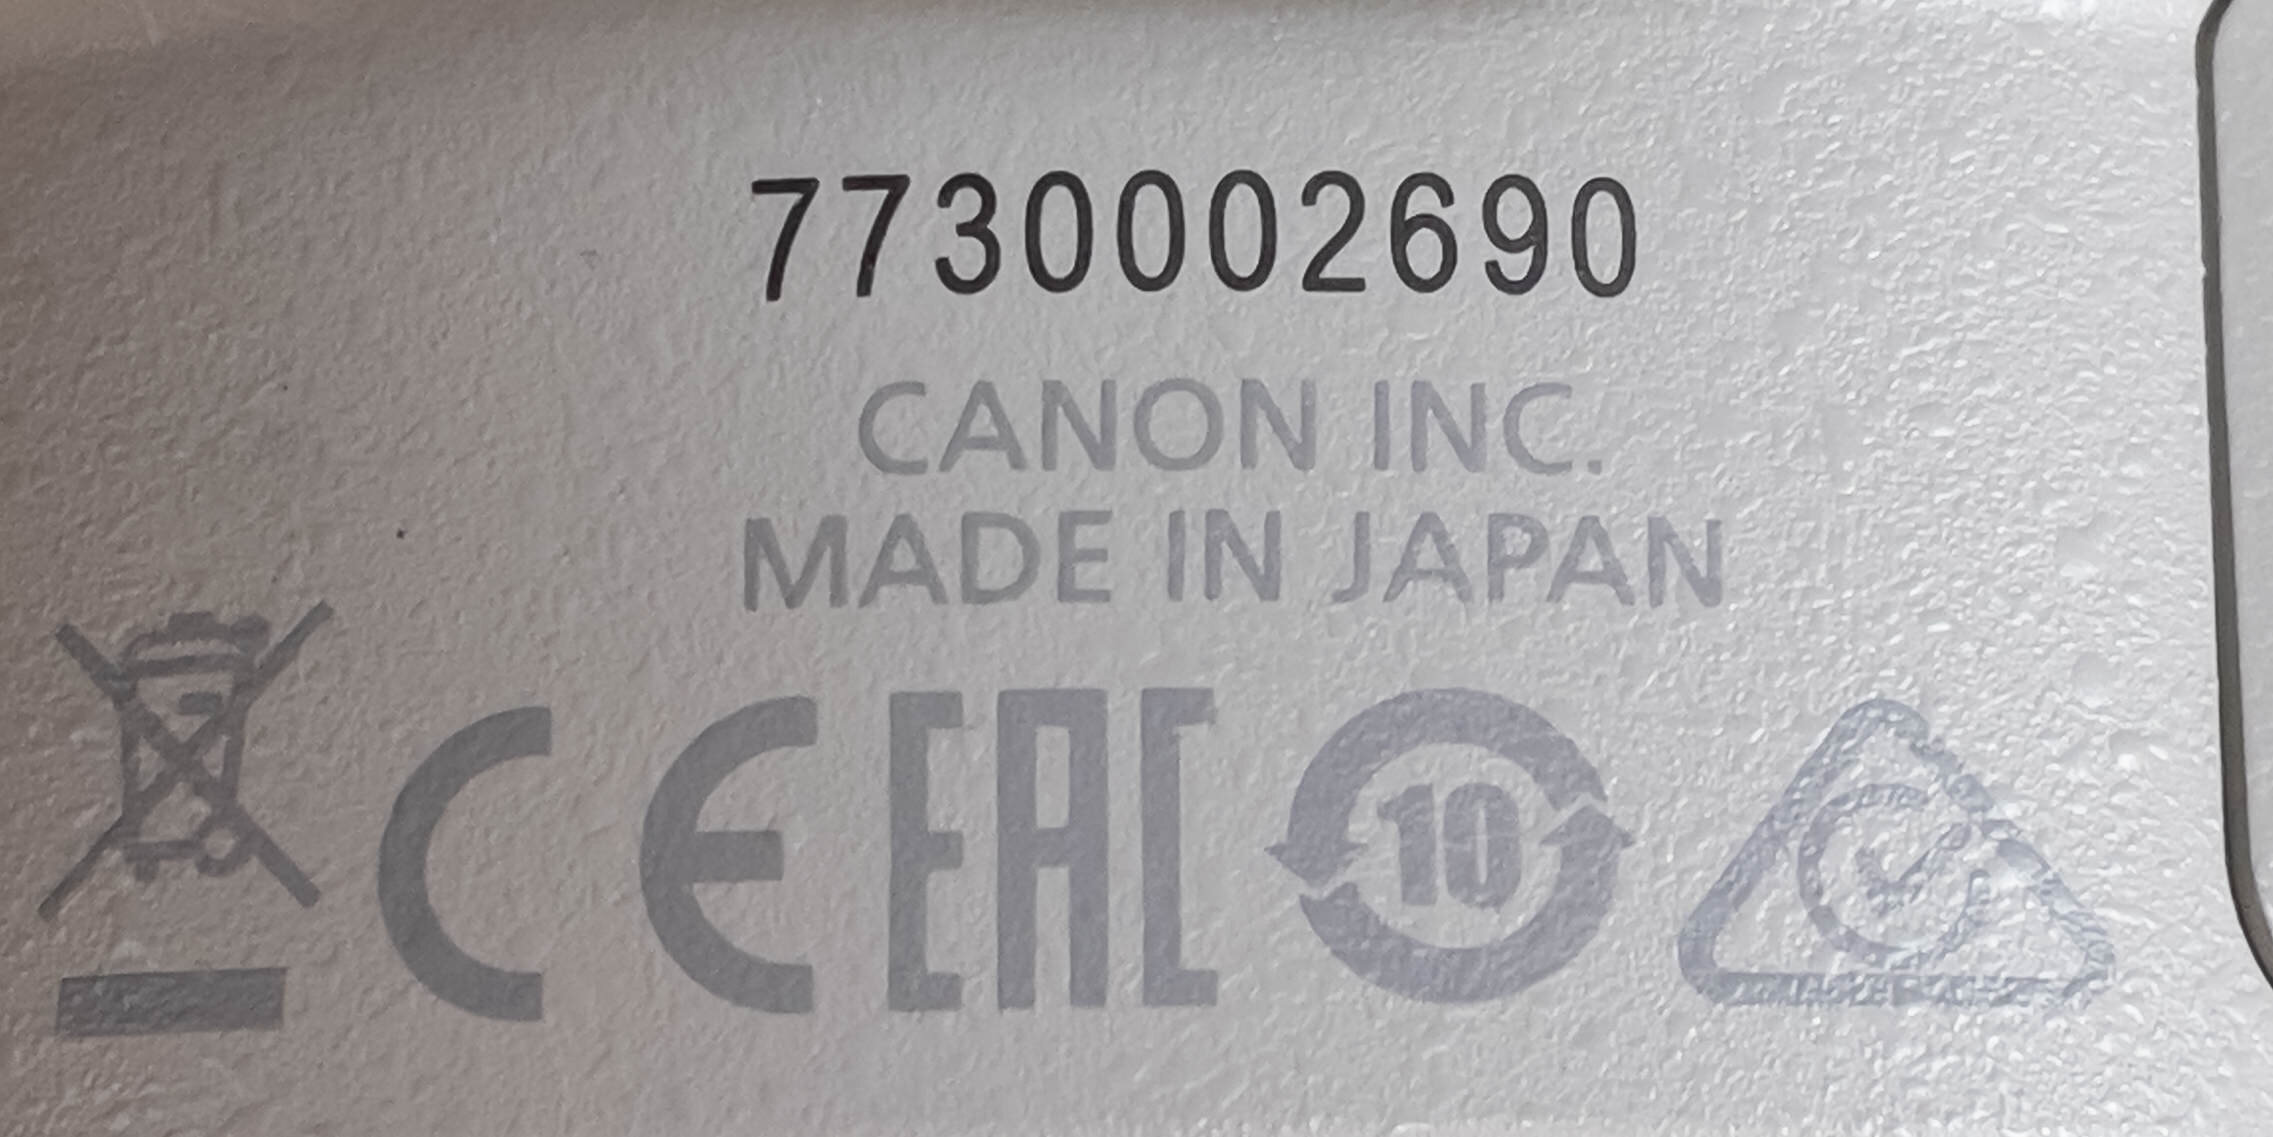 What does the serial number mean on your Canon lens?